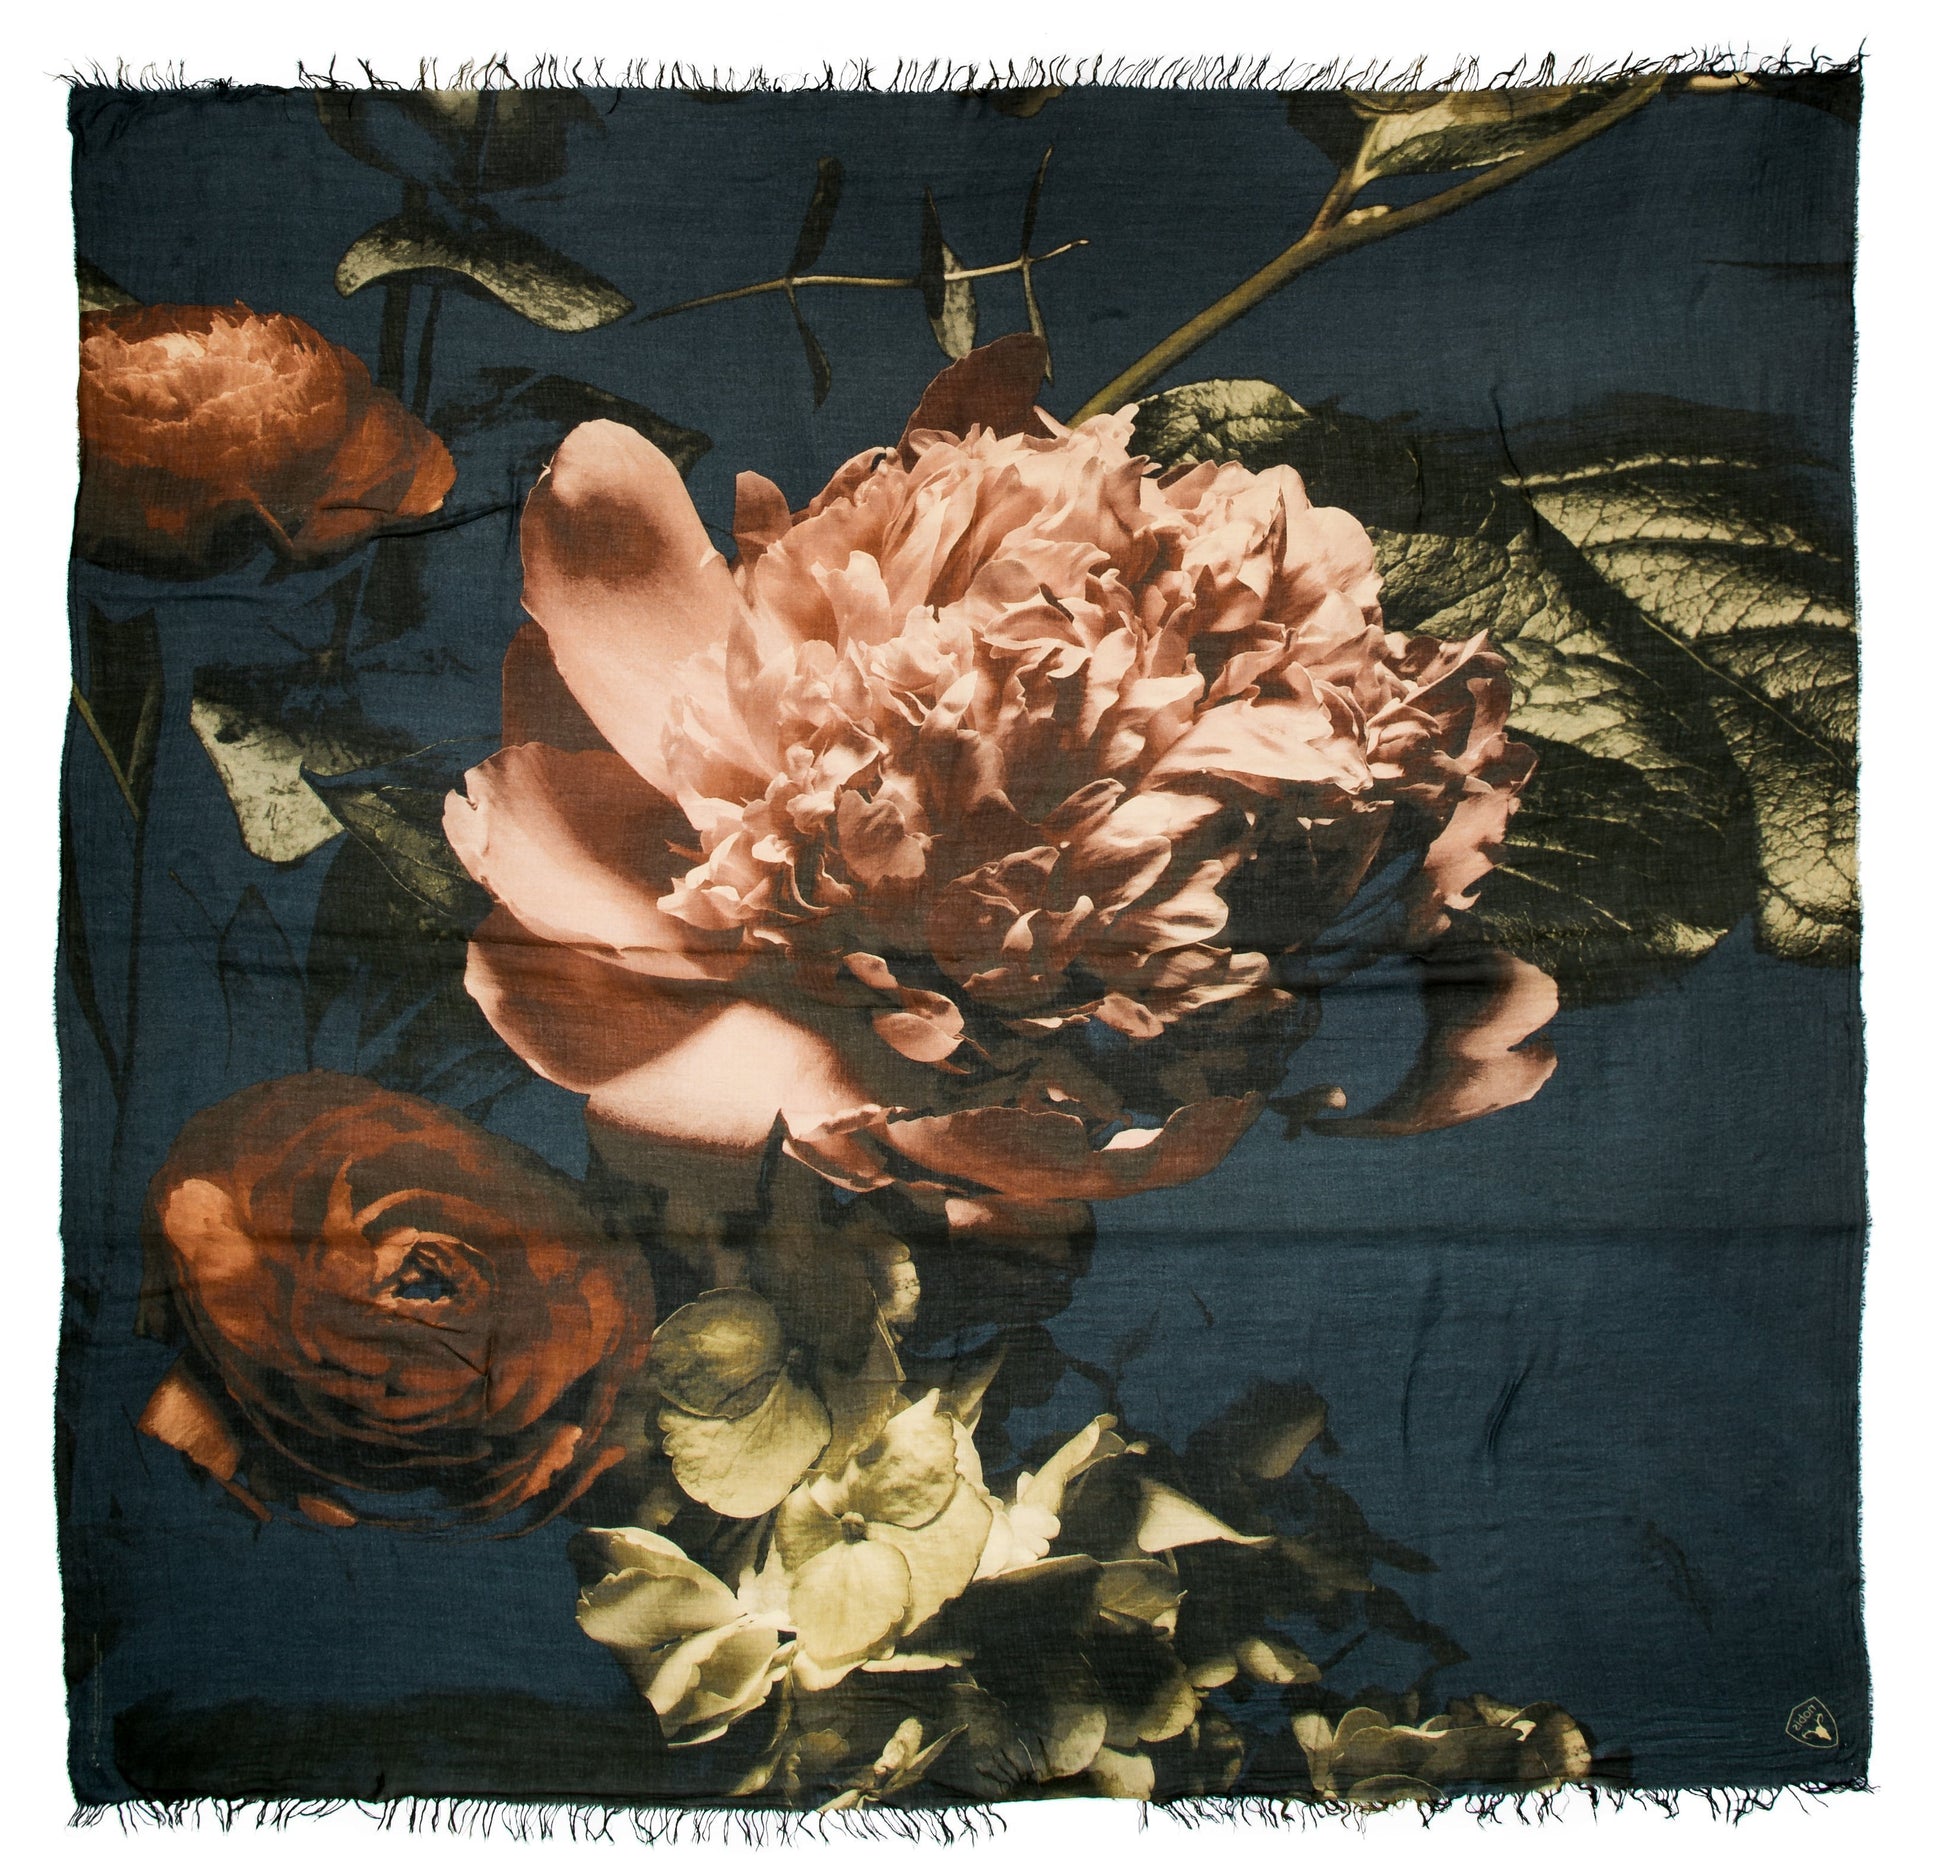 Square modal cashmere blend scarf with fringe edges in a Floral Print